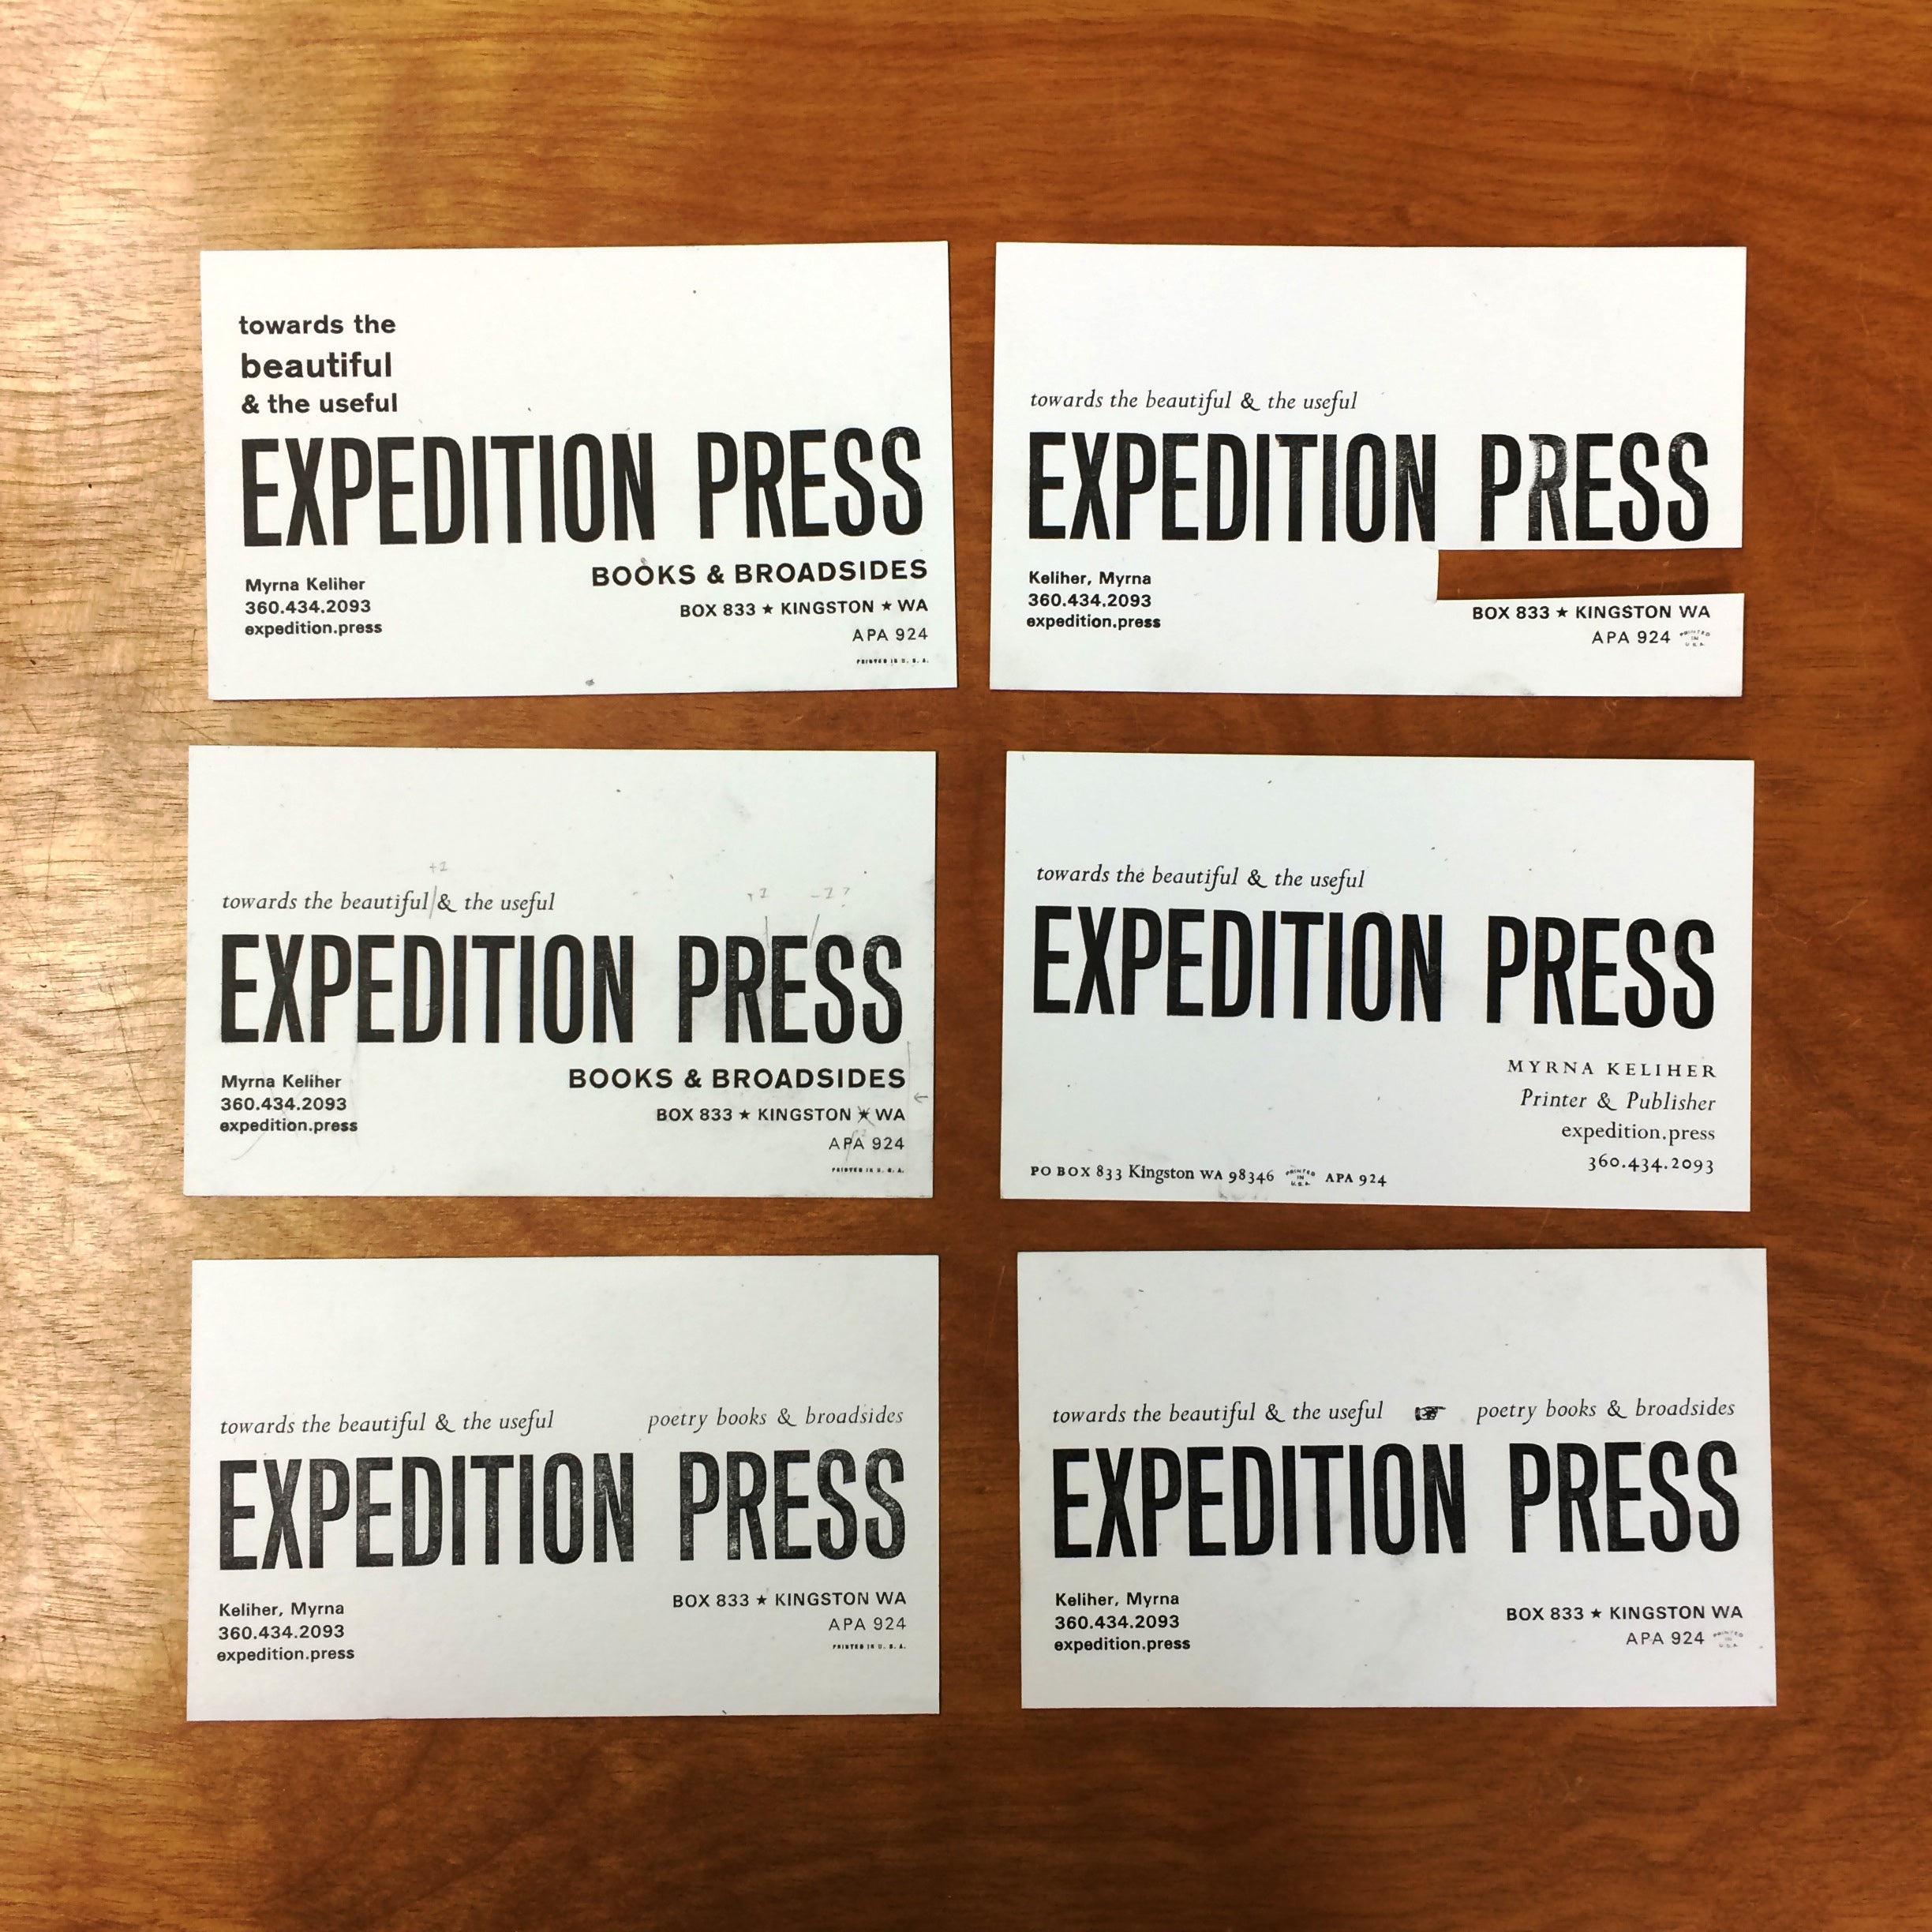 six proofs of the Expedition Press prop card